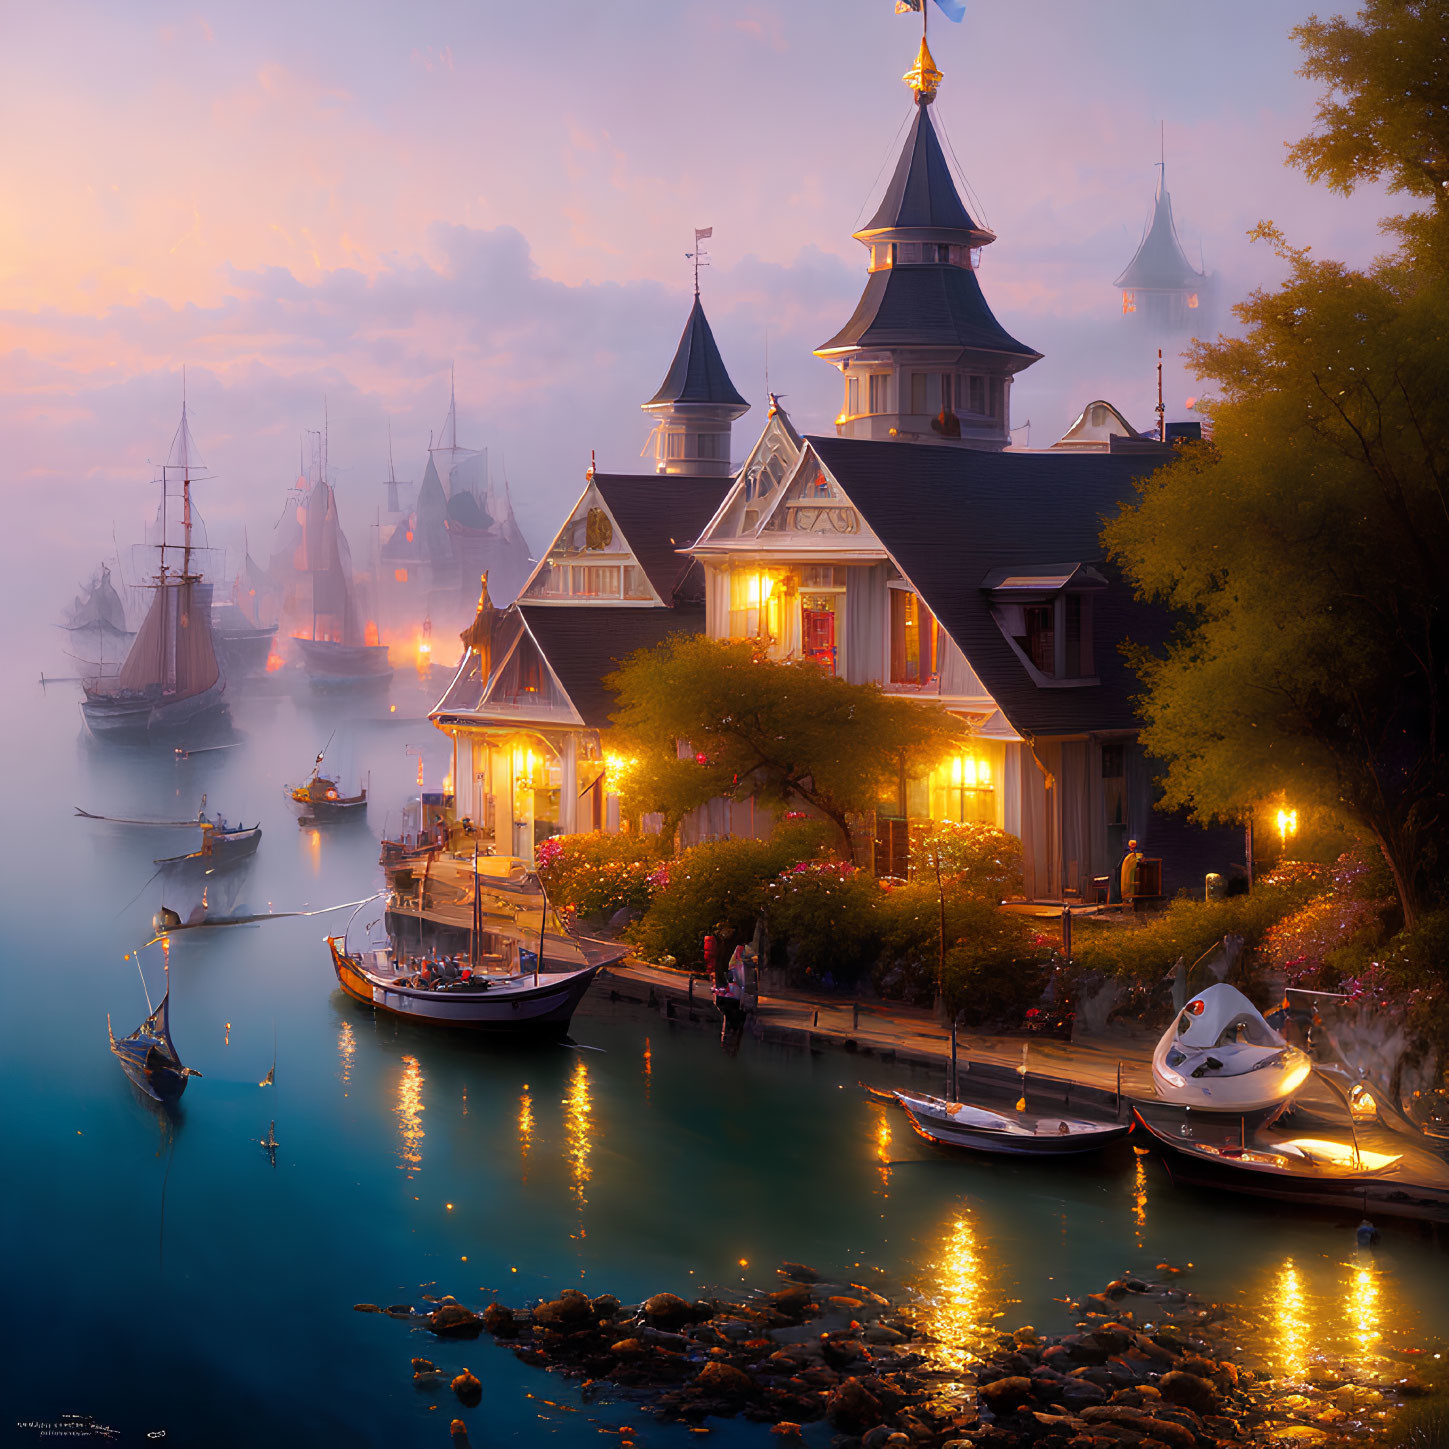 Serene harbor at twilight with Victorian-style building, boats, and pastel sky